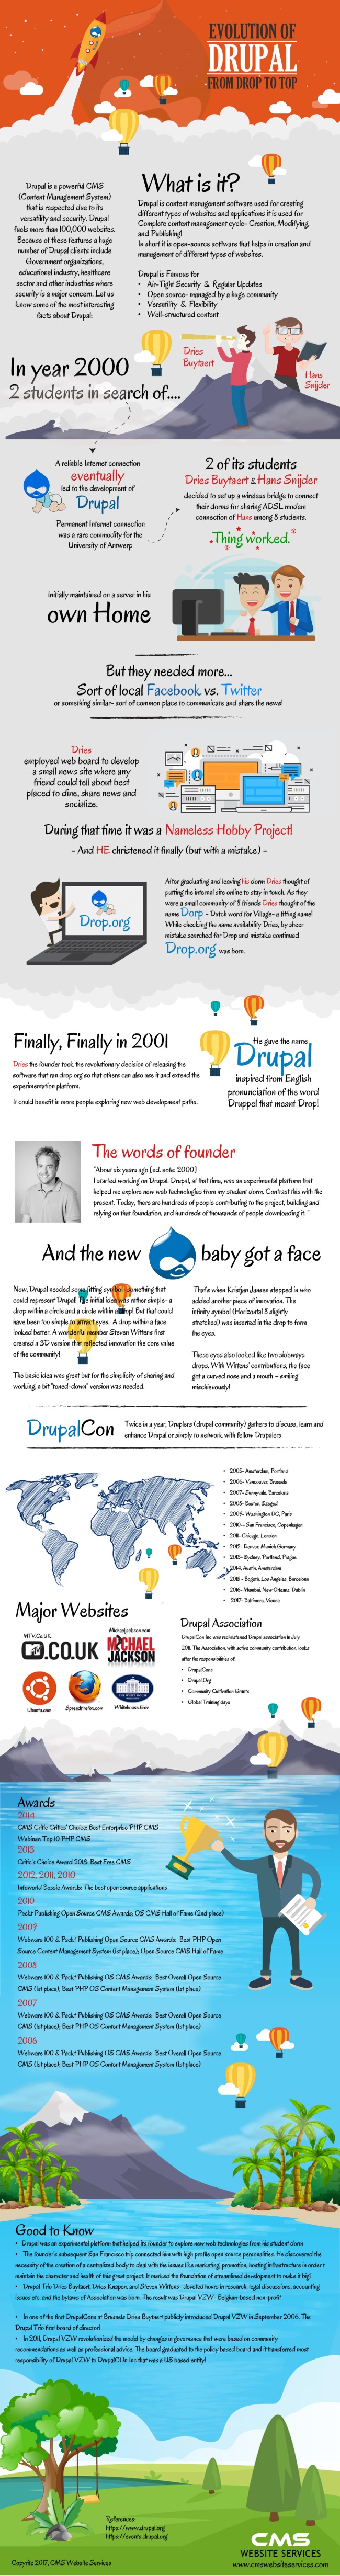 Drupal development evolution From Drop To Top